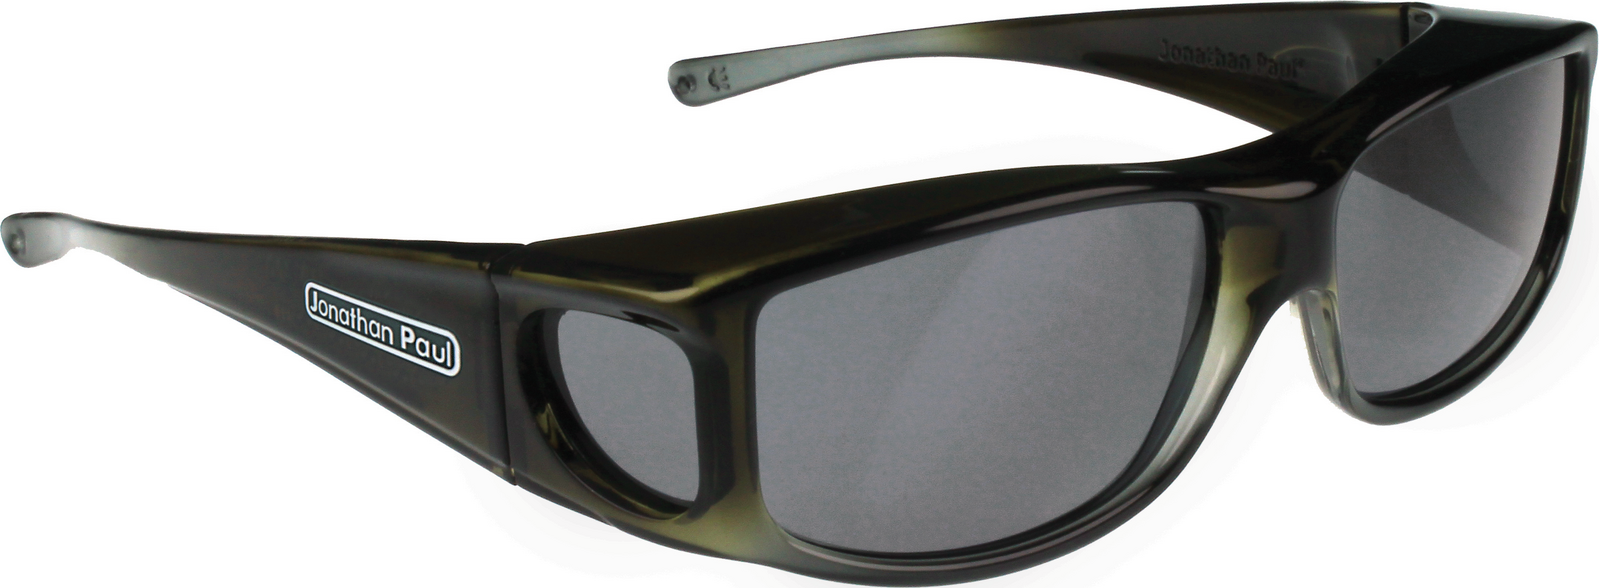 Fitovers Jett JT005 Olive Charcoal / Grey Silver Blue Mirror Polarised Lenses